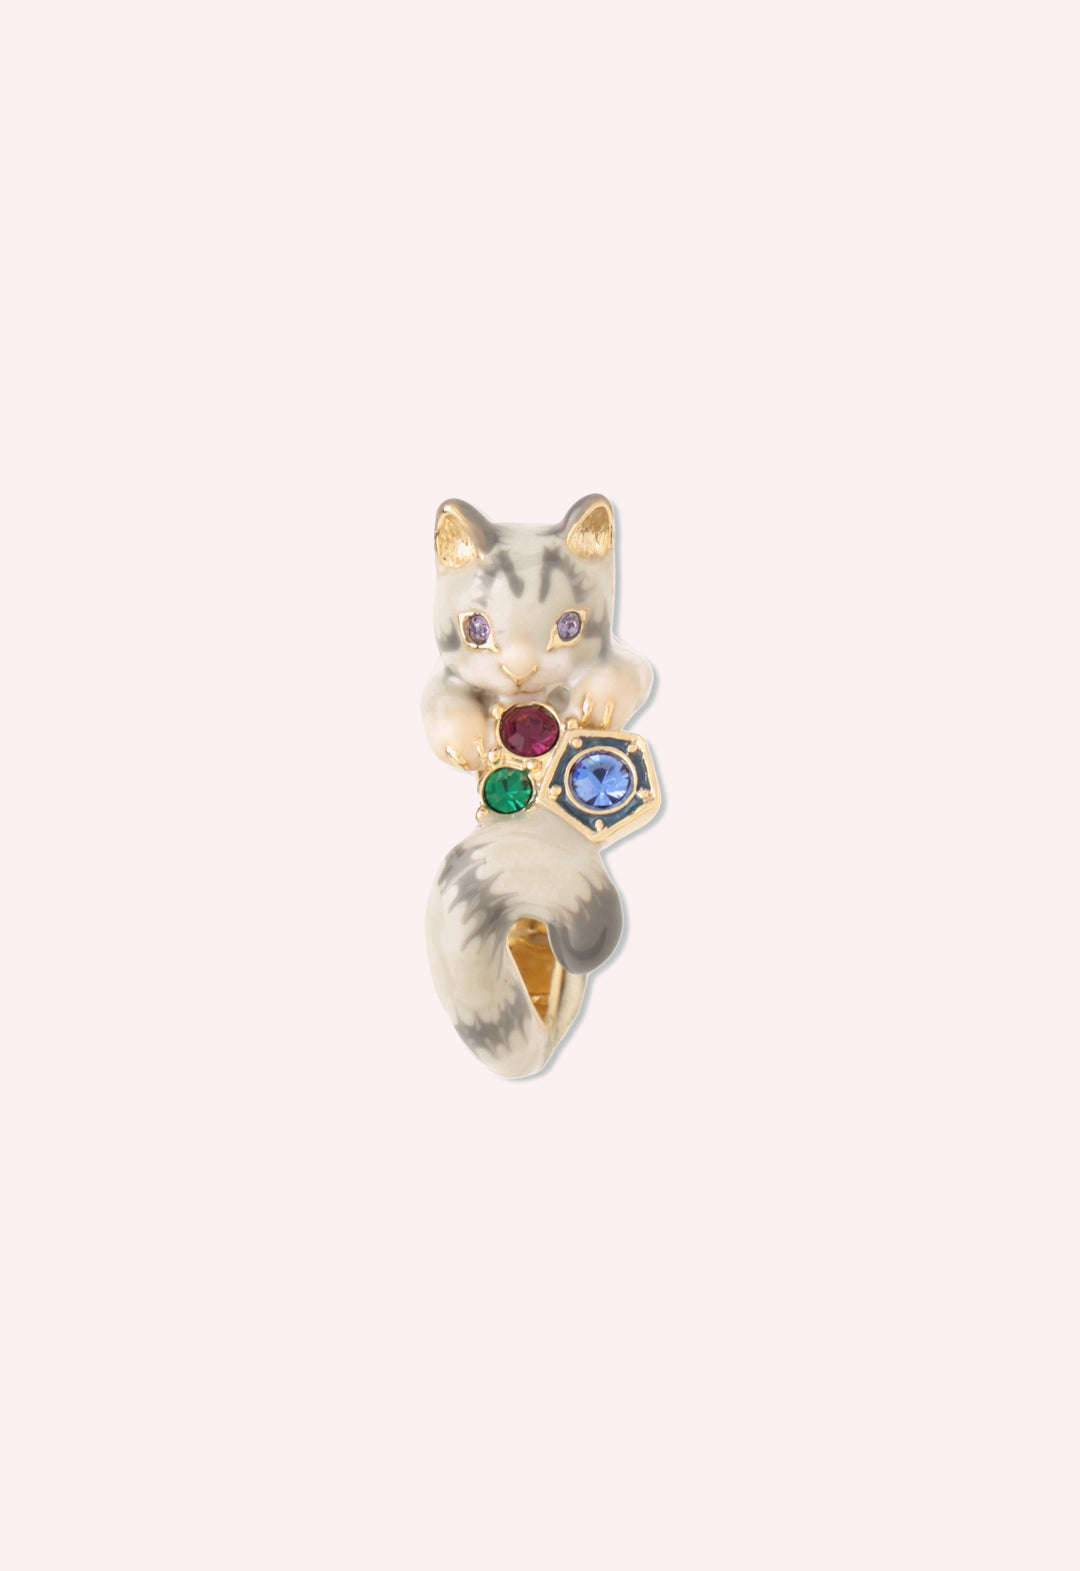 Curled & Cozy Cat Ring Grey Multi, Striped Grey cat with blue/red/green gems